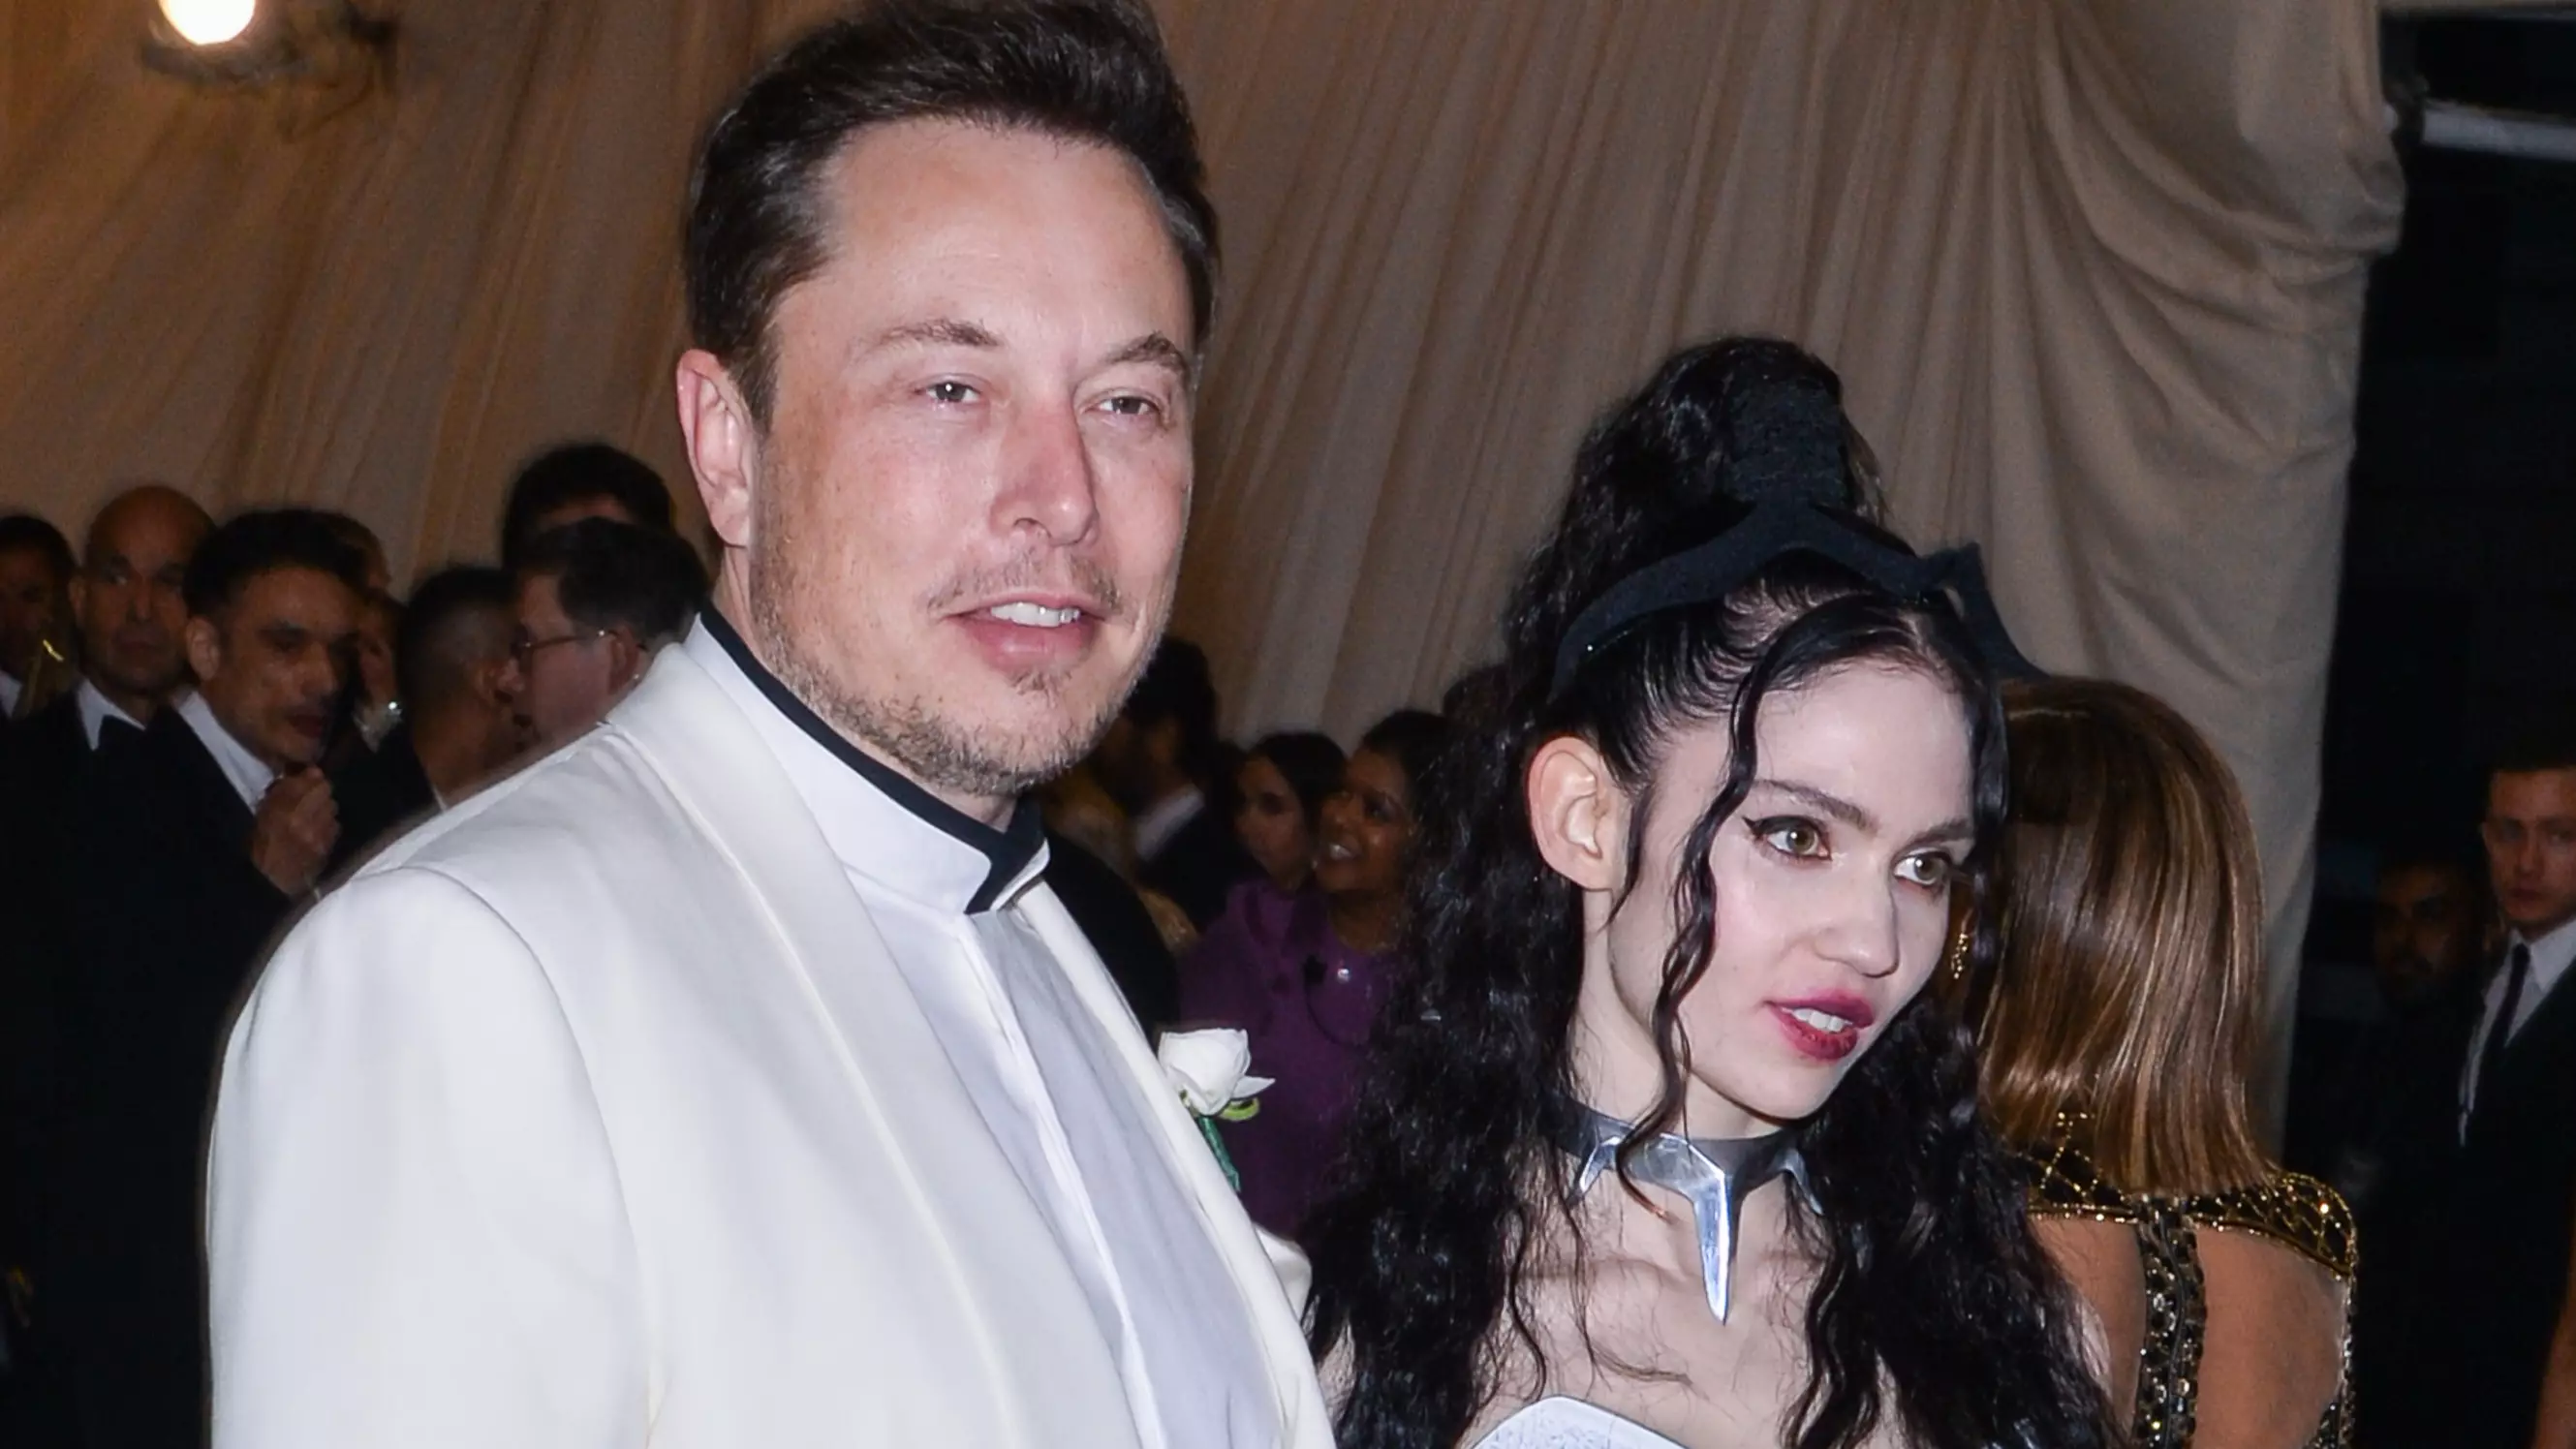 Elon Musk Attends Met Gala With Musician Grimes And They Are Dating